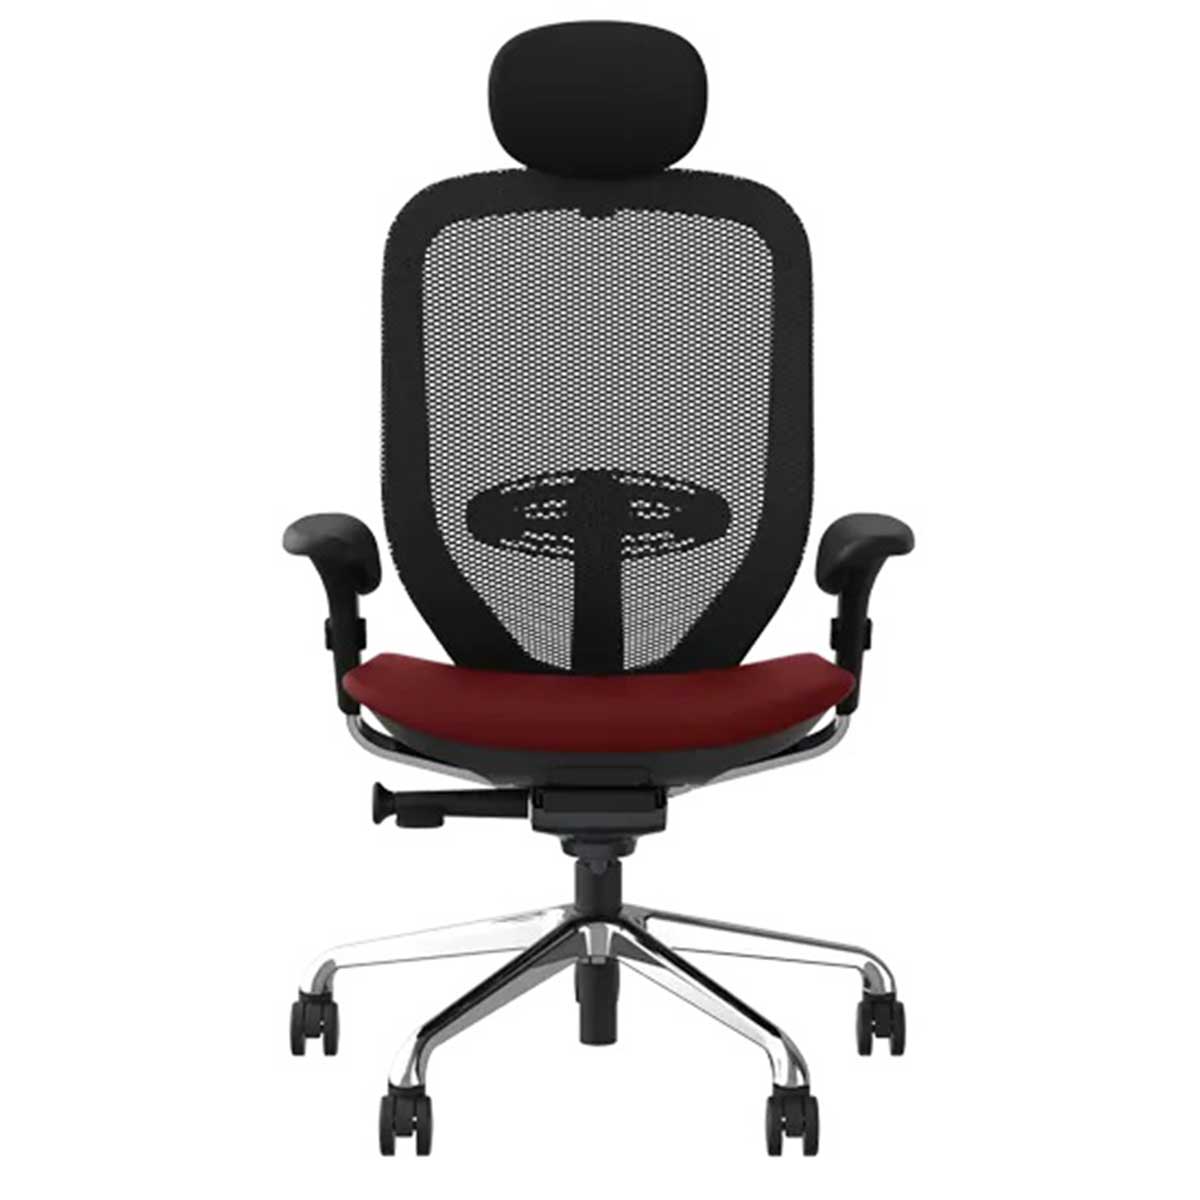 Ergonomic Chairs Manufacturers, Suppliers in Anand Vihar